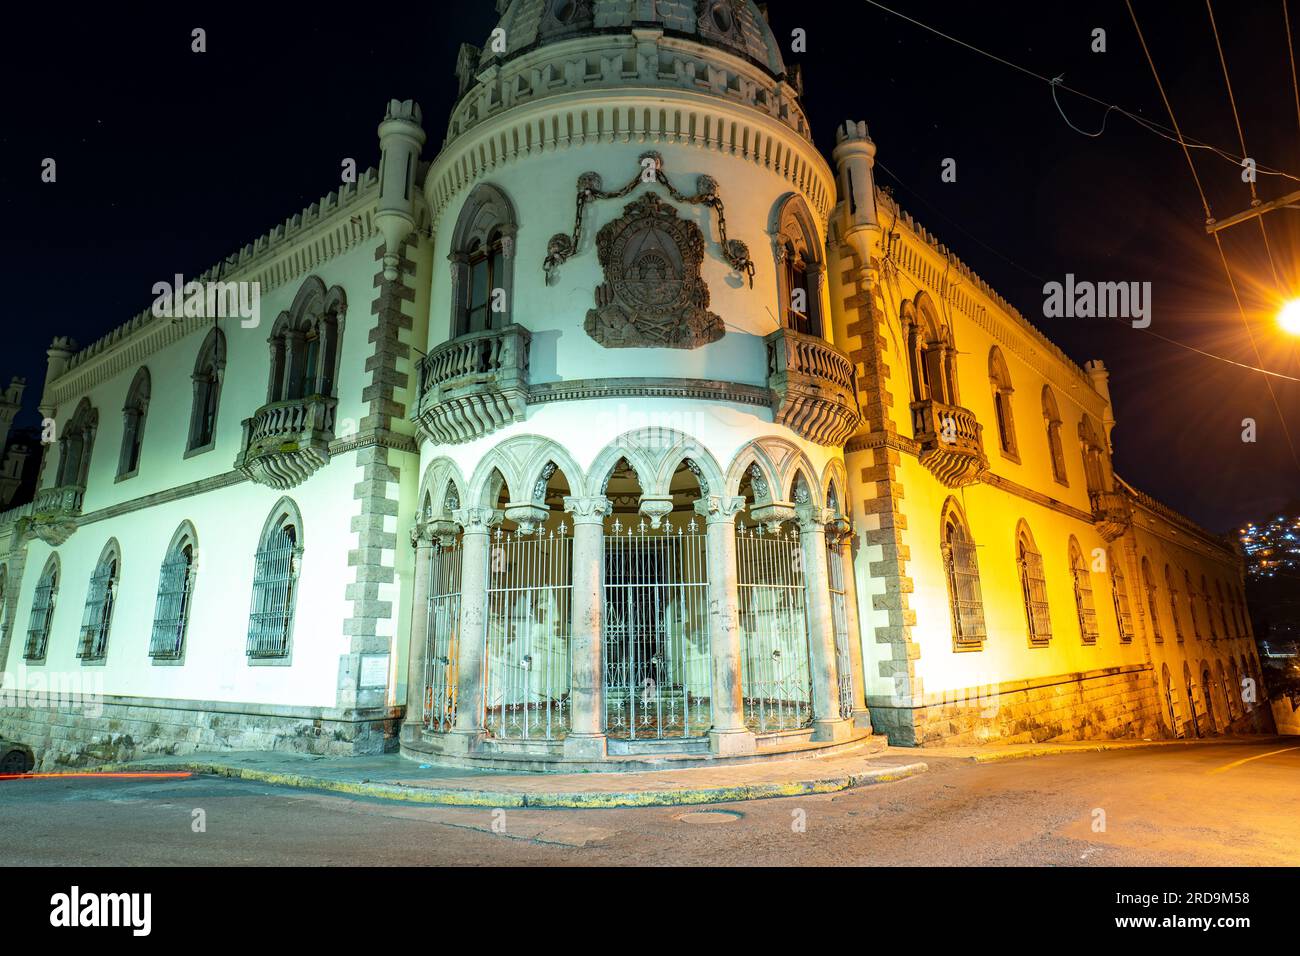 Tegucigalpa, Francisco Morazan, Honduras - December 11, 2022: Former Presidential House with Empty Street in Downtown City at Night Stock Photo